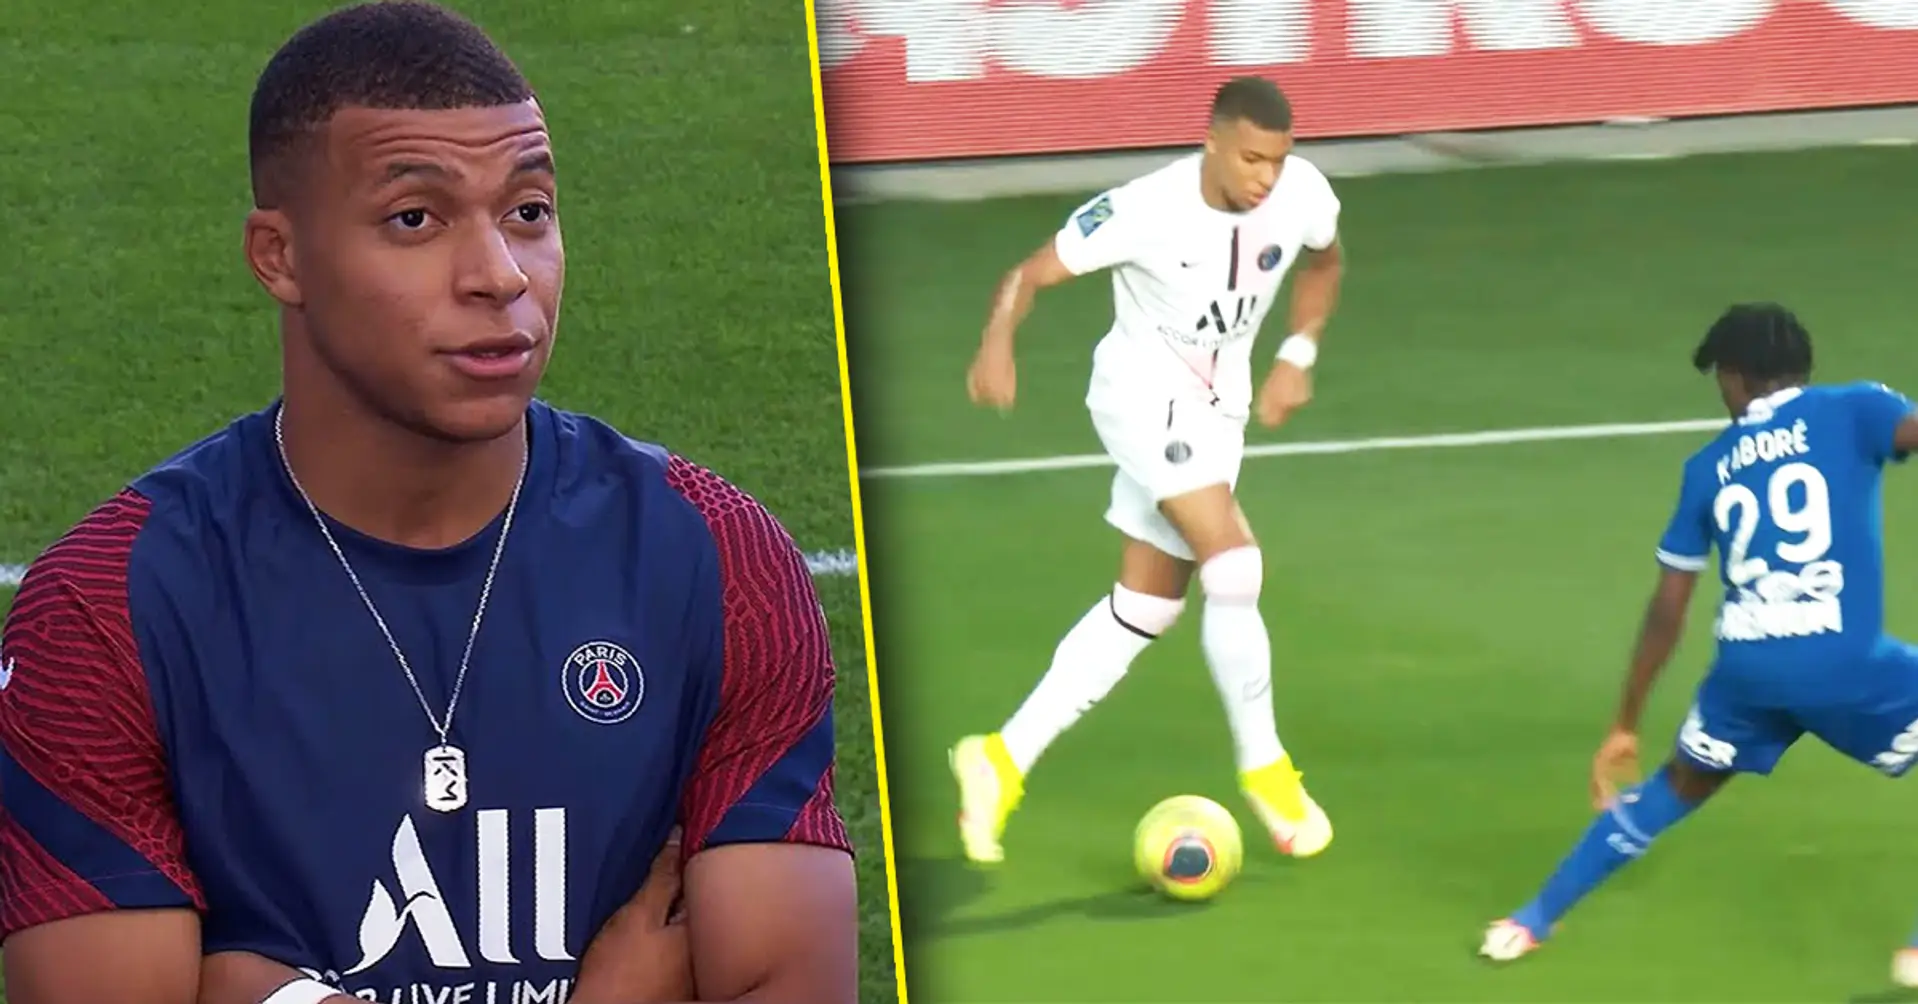 ‘I’m following them closely’. Mbappe reveals one team that he always watches – not Real Madrid